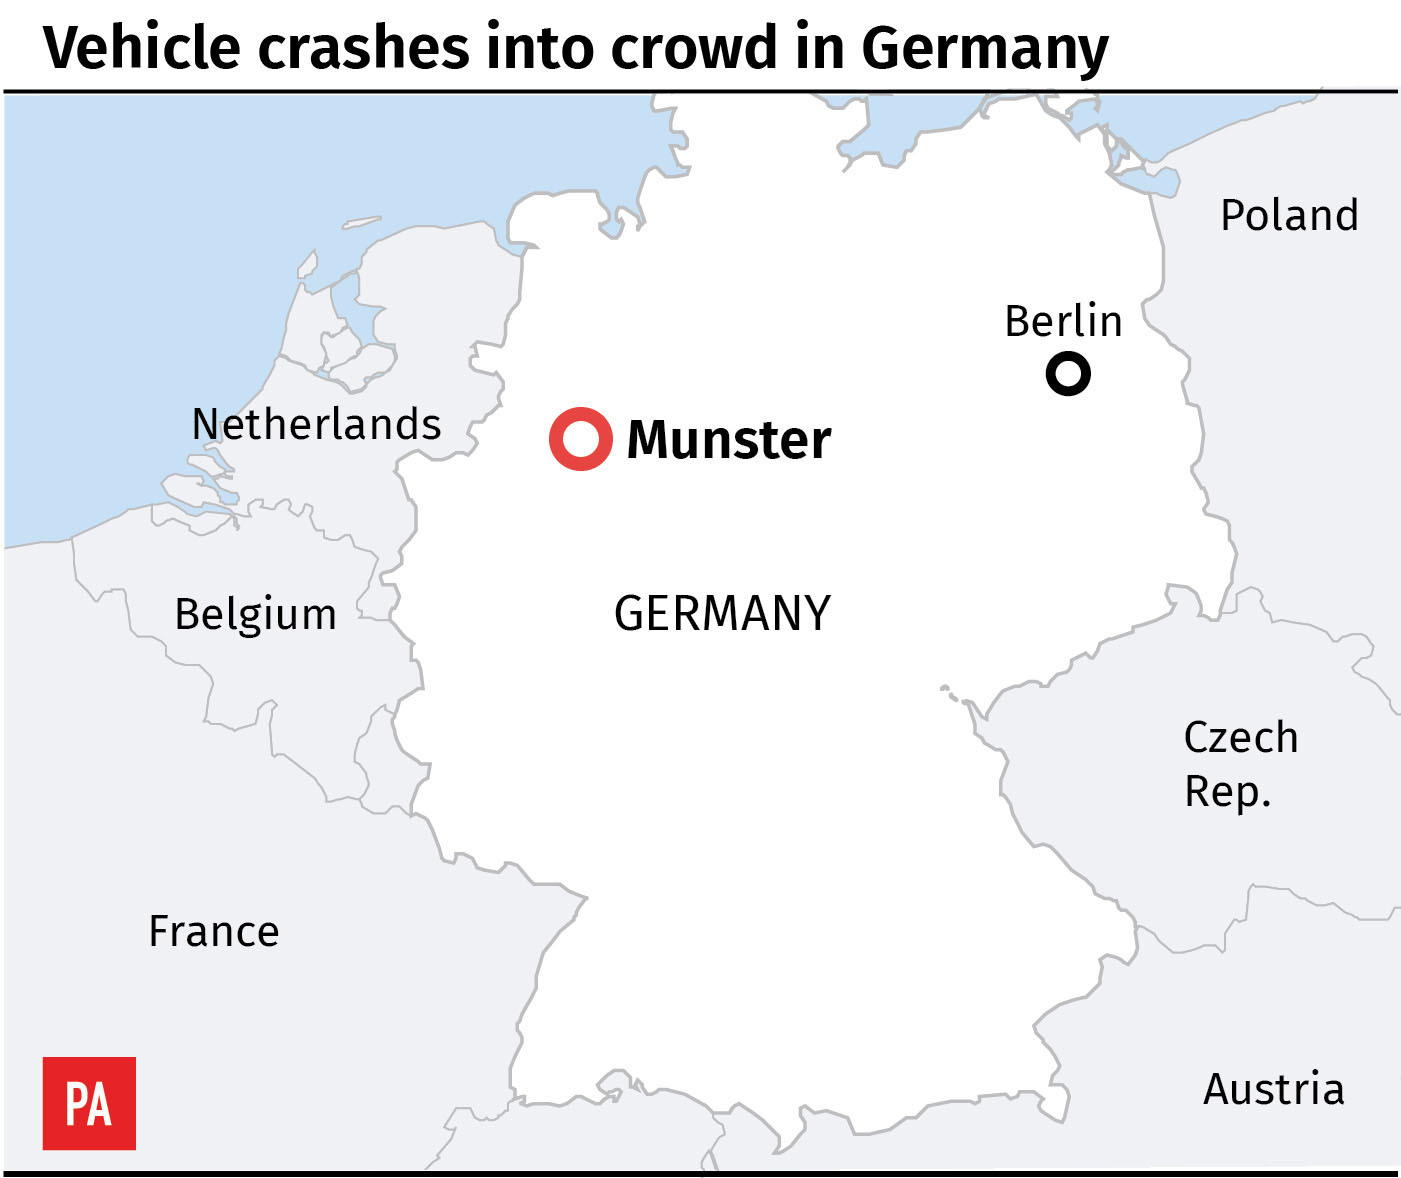 Map locates Munster in Germany where a vehicle crashed into crowd